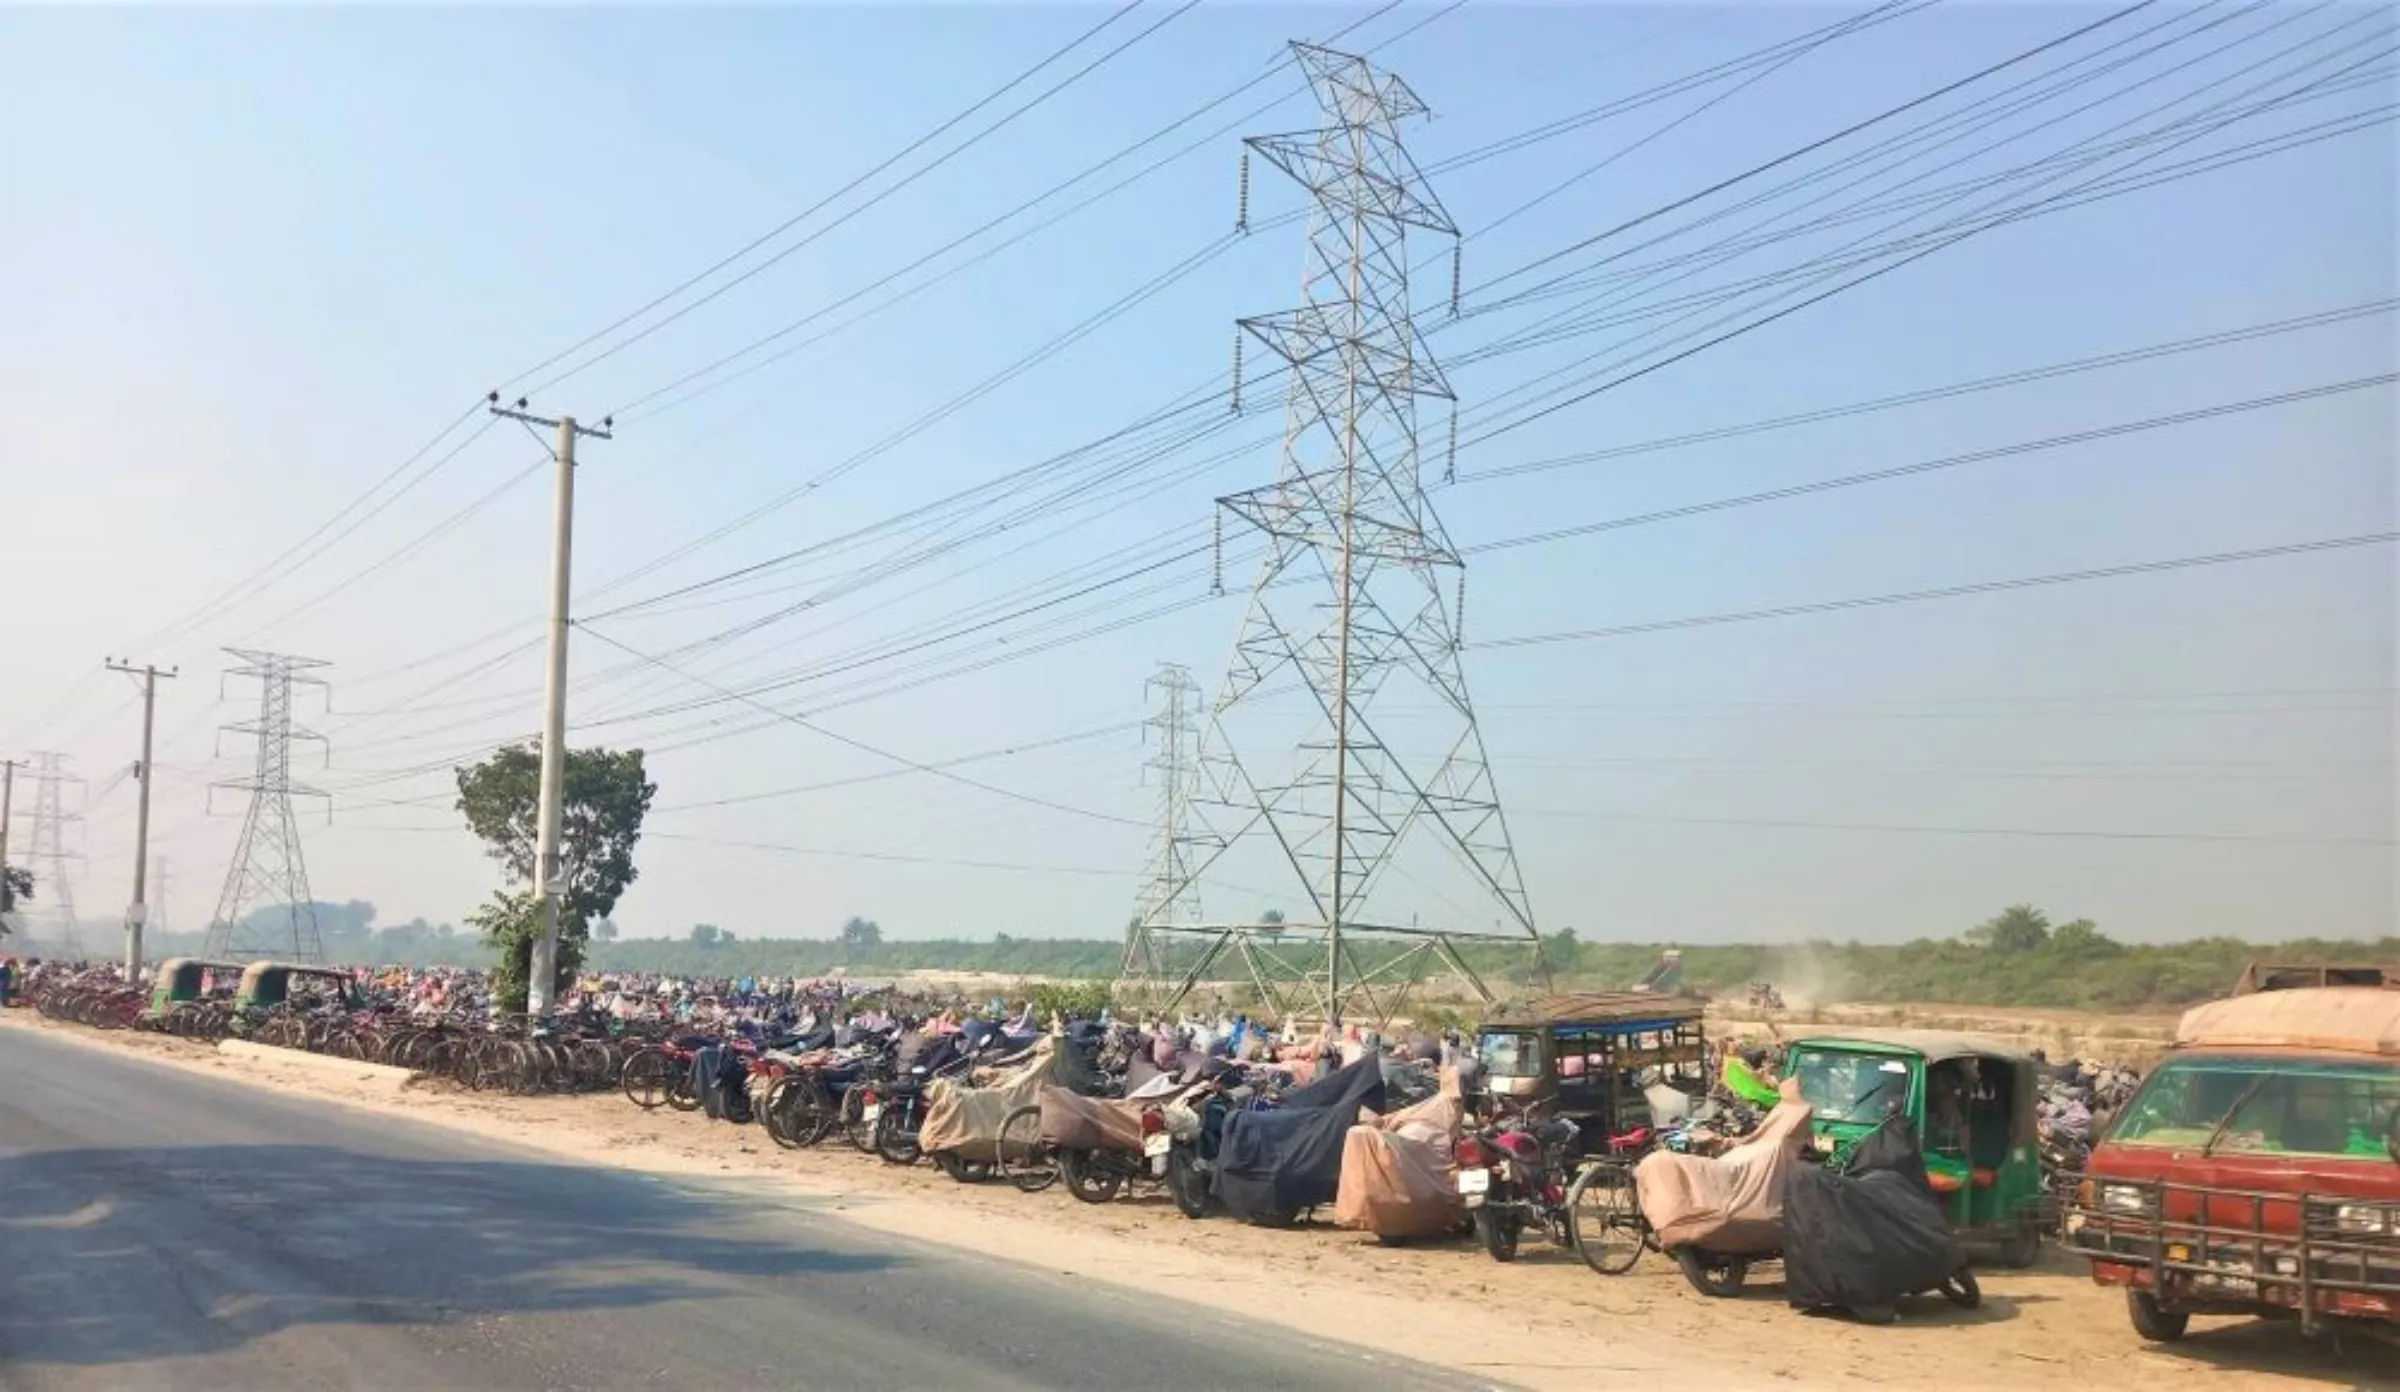 Motorcycles and cycles of workers employed at building the Rooppur plant are stacked in rows before the construction site, Bangladesh, 15 December 2022